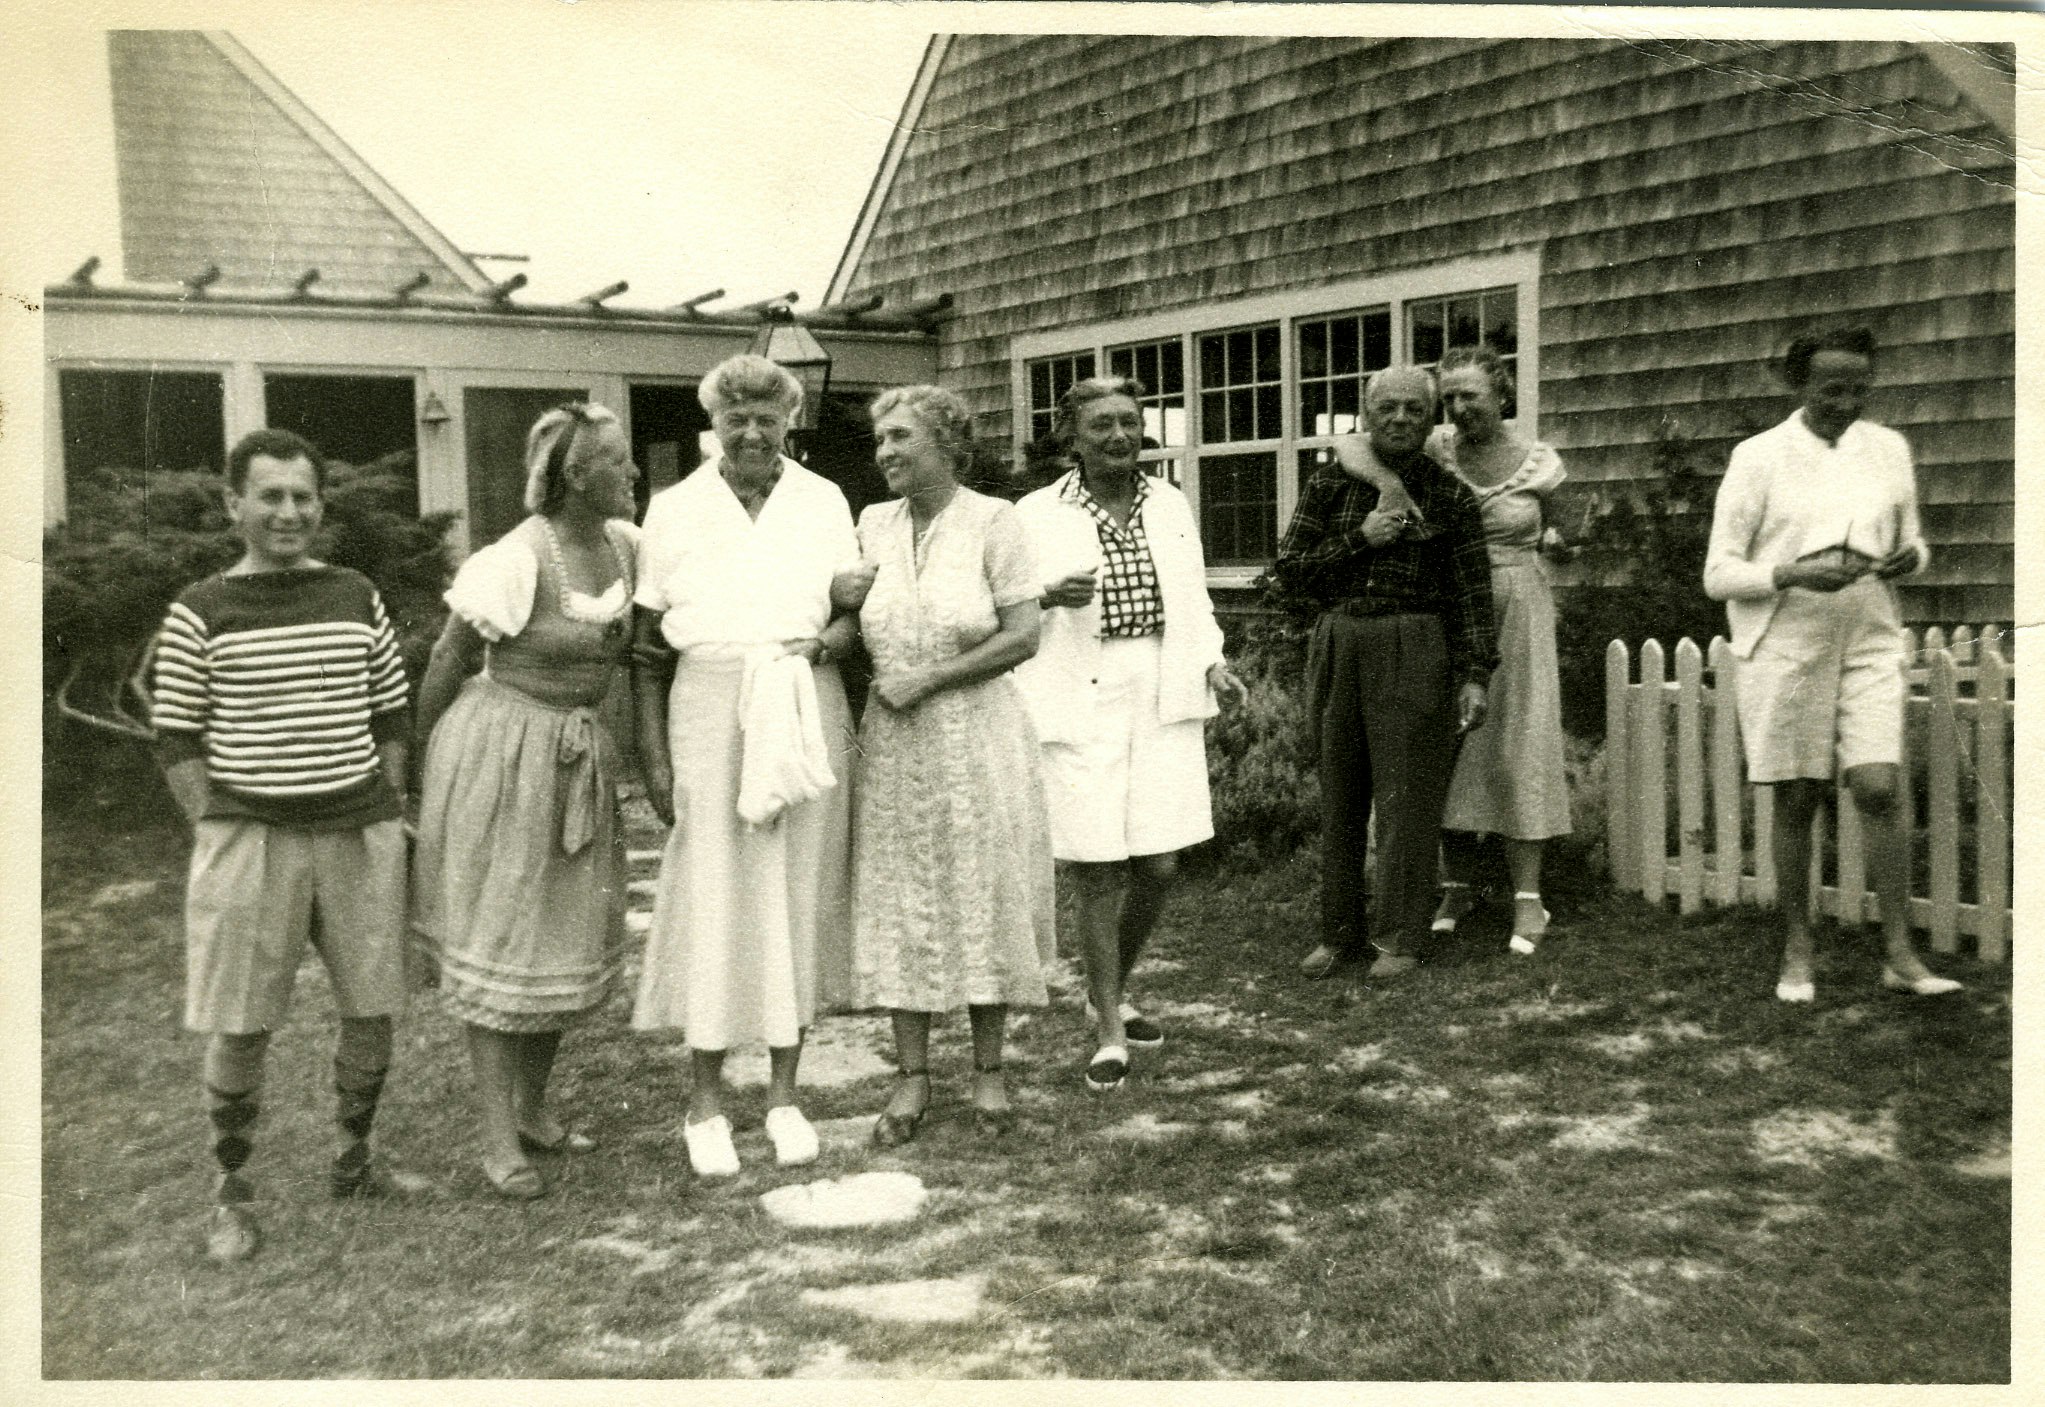 Helen Keller with others, including Eleanor Roosevelt, Kit Cornell, and Joseph Lash at "Chip-Chop," Cornell's home on Martha's Vineyard